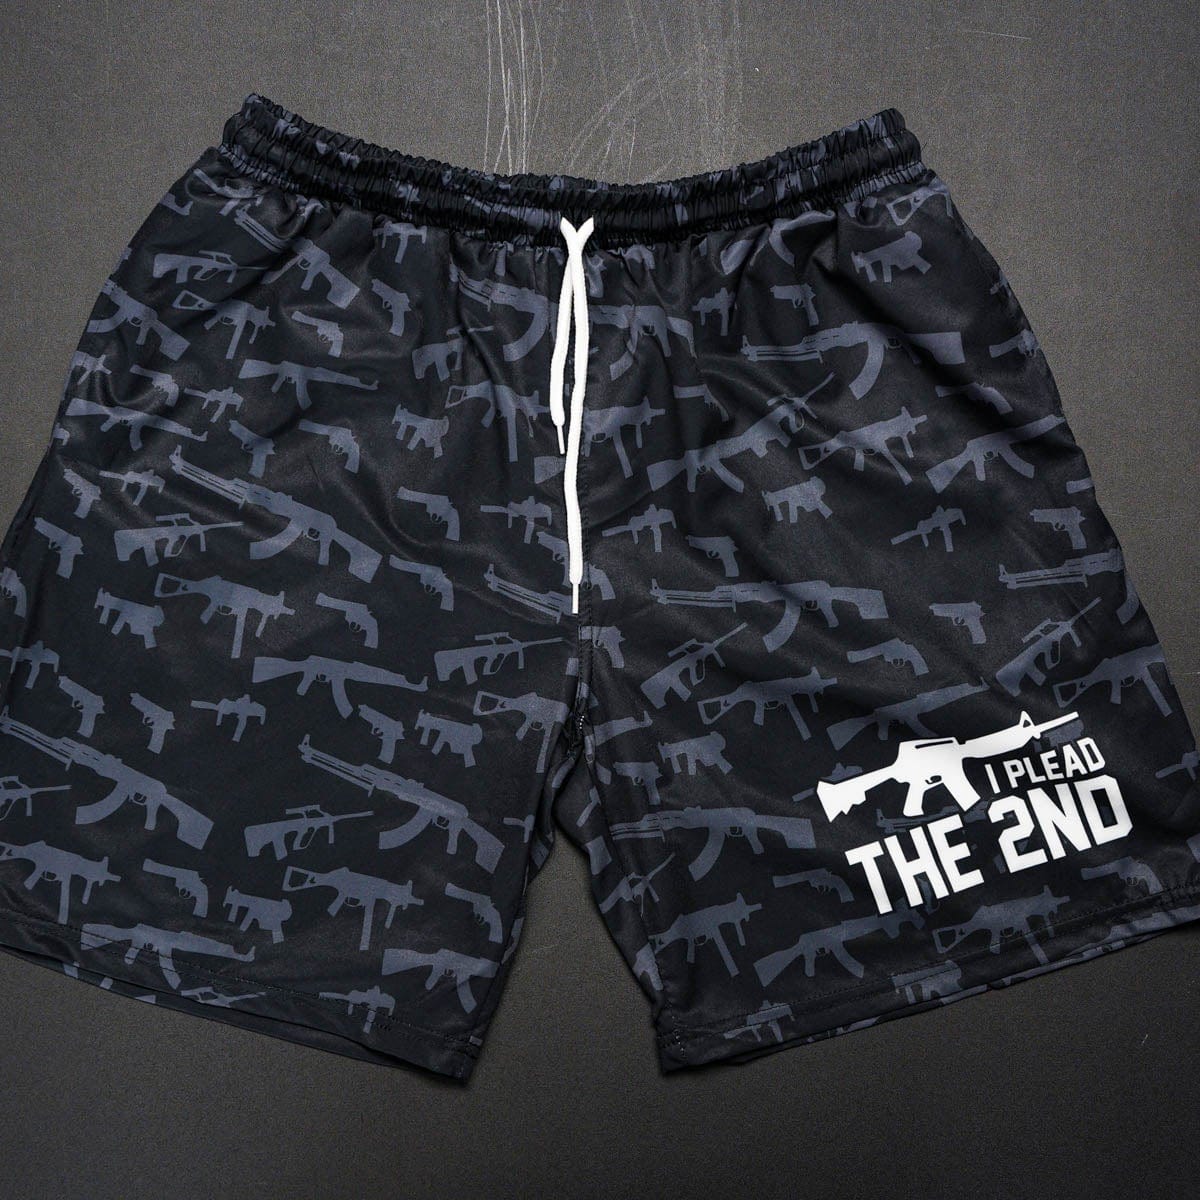 Thumbnail for I Plead The 2nd Swim Trunks - Greater Half